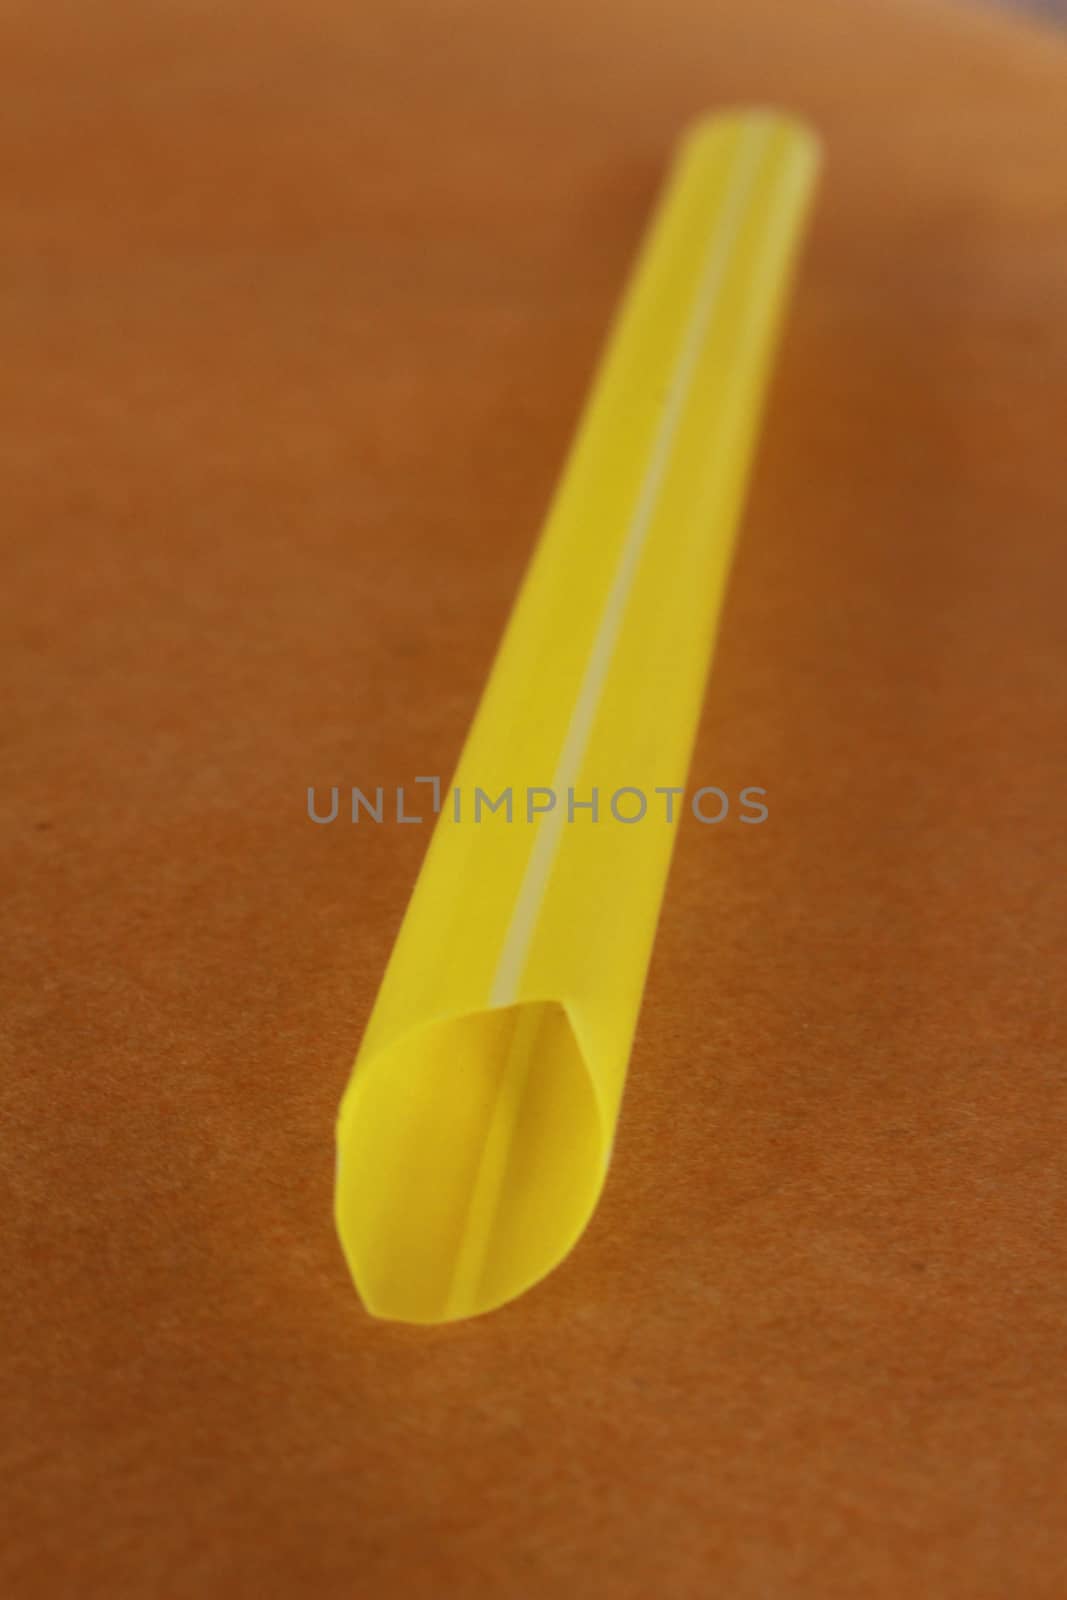 The yellow plastic straw use for drink or be the meterial for artwork.